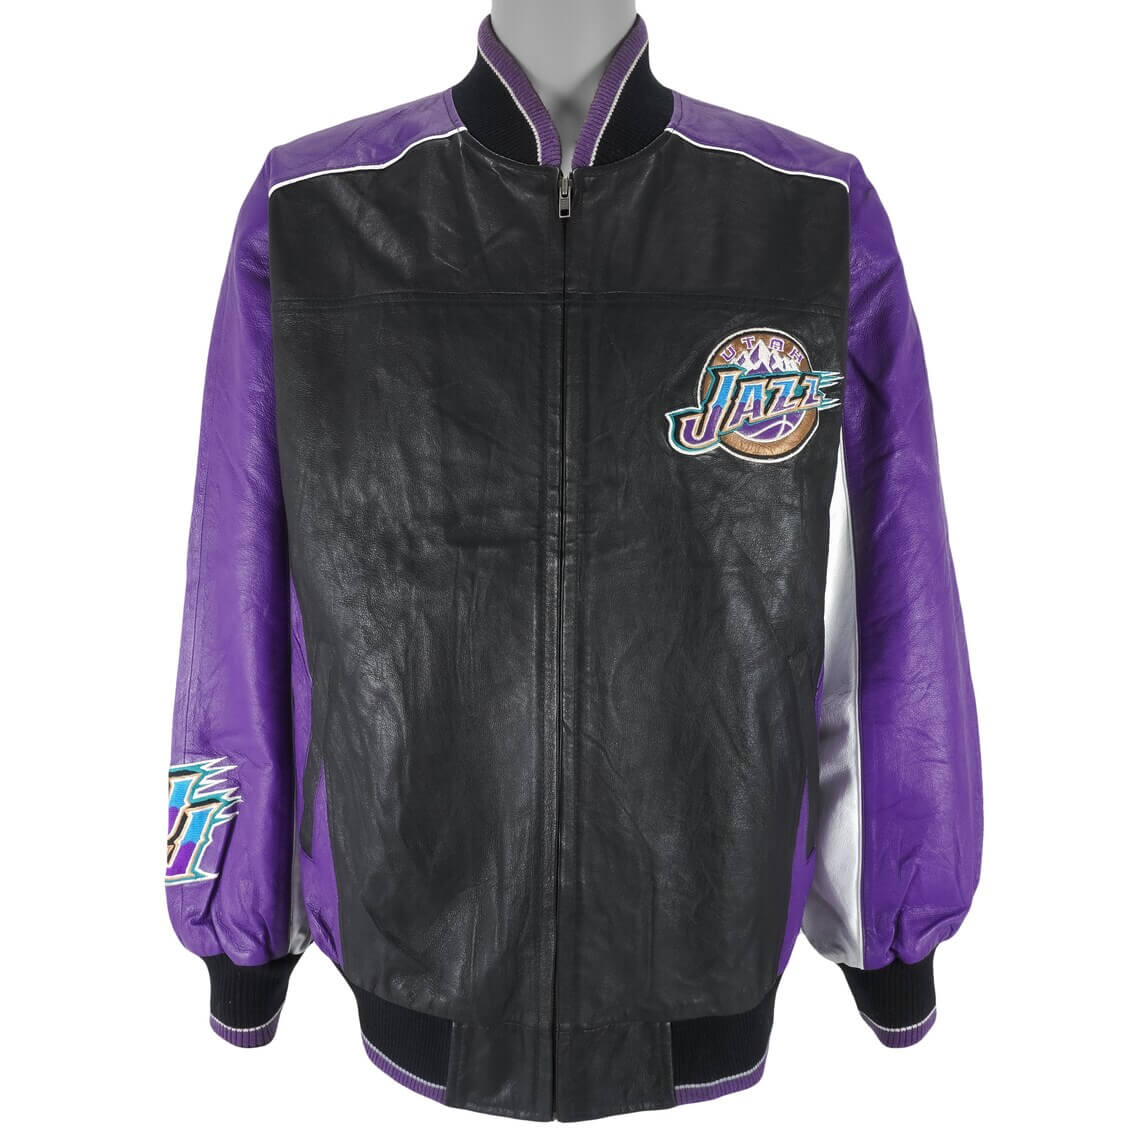 NBA 1990's Utah Jazz Spell Out Leather Jacket - Maker of Jacket